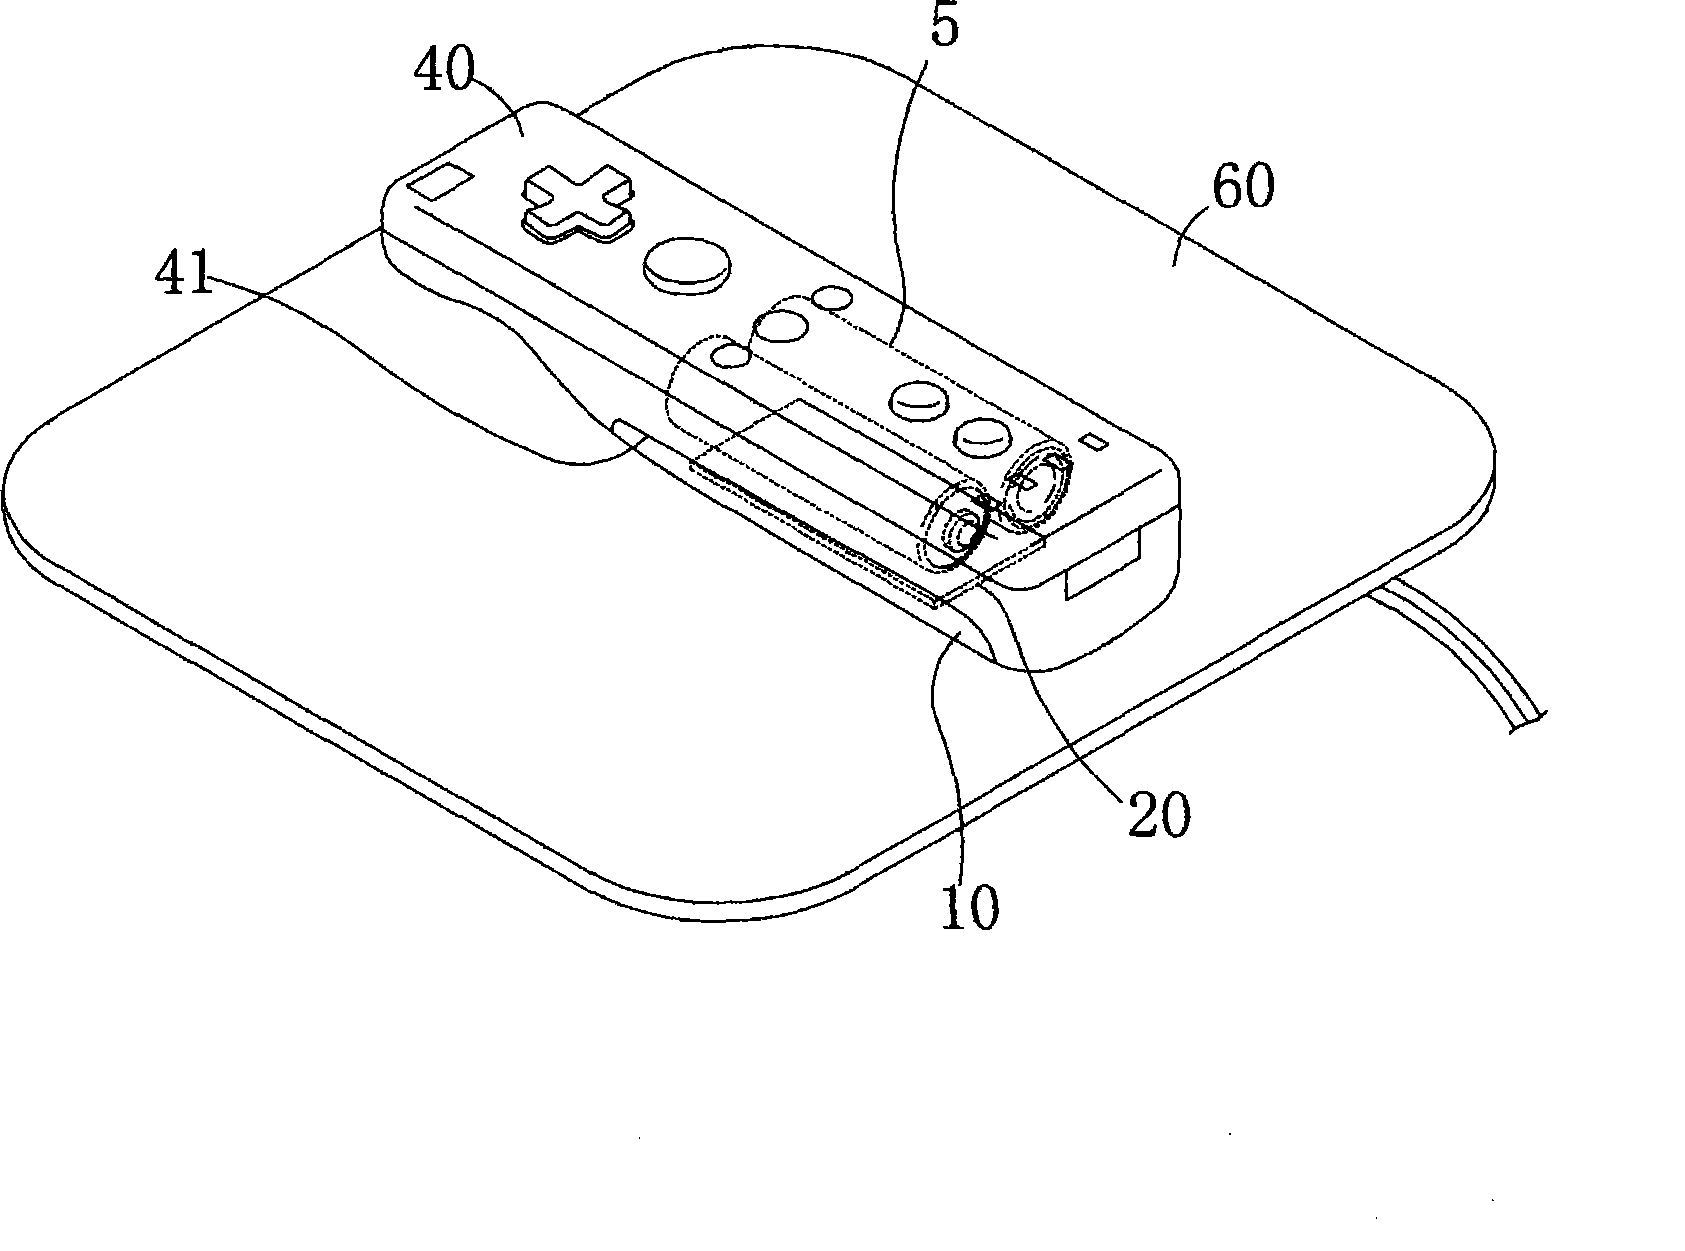 Battery cover